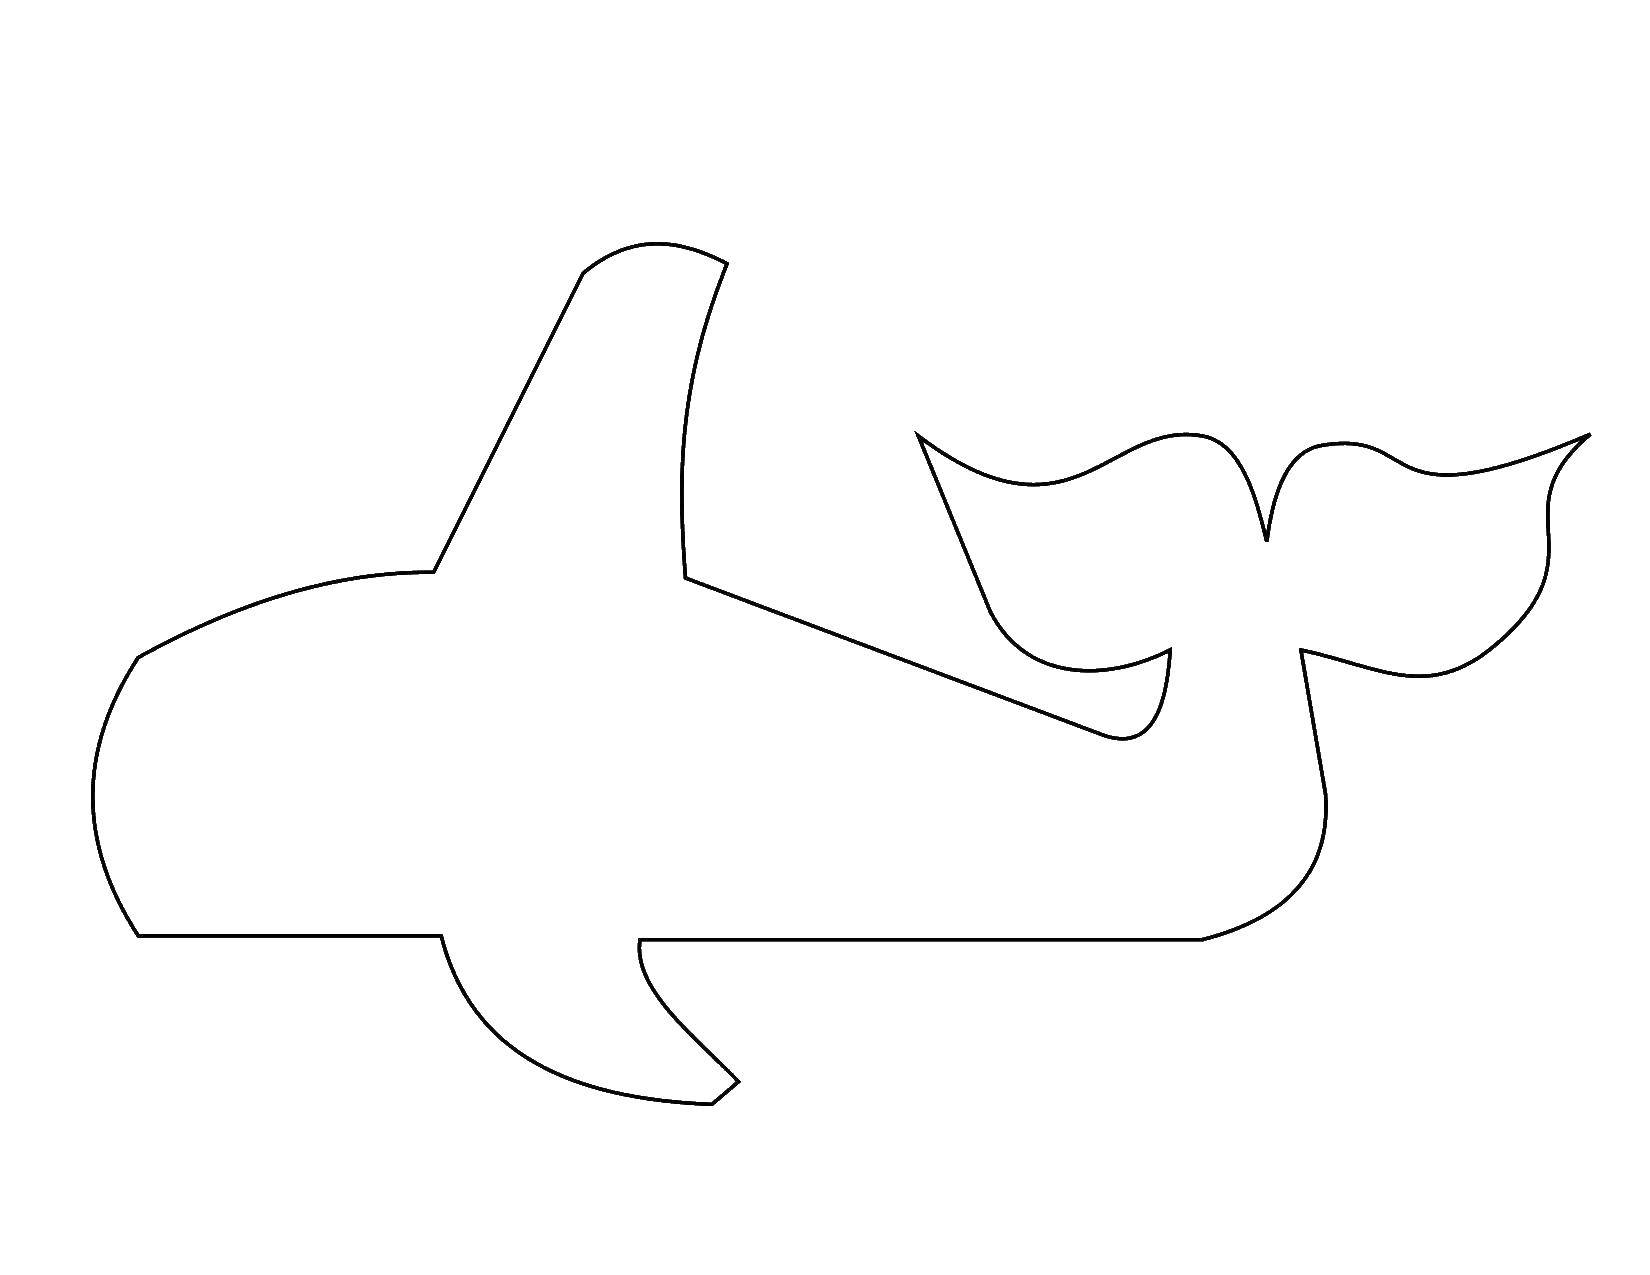 Coloring The outline of the shark. Category Contours of fish. Tags:  fish, outline, shark.